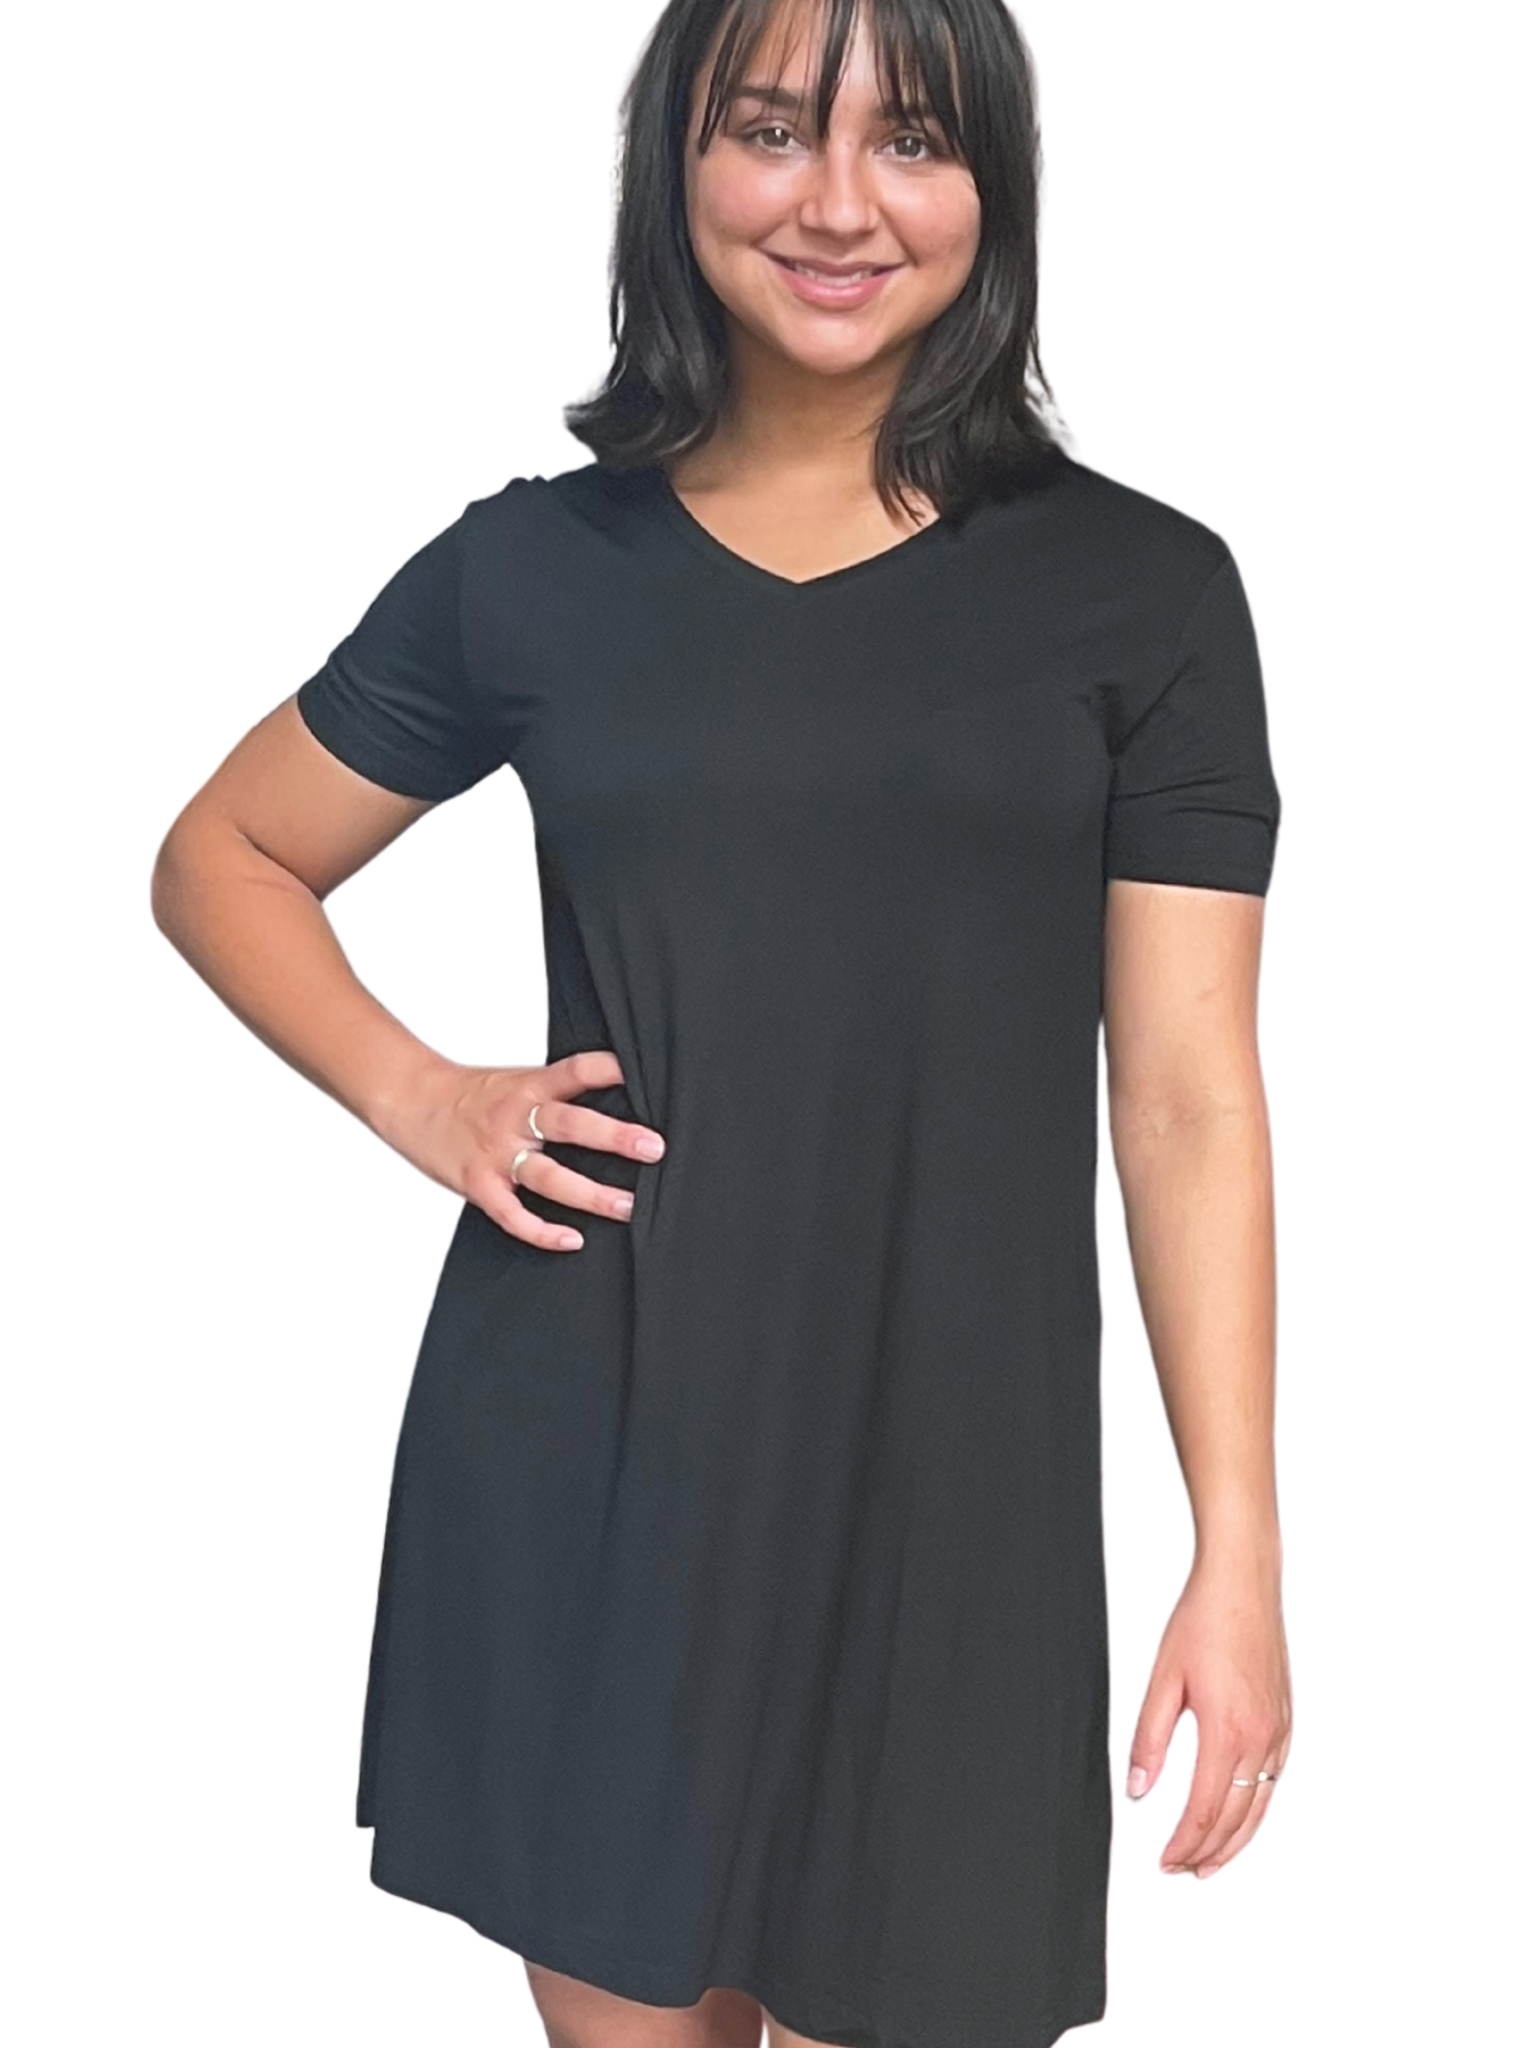 Bamboo Nightshirt/ Nightgown in black background that is great for night sweats during menopause varianta:: black